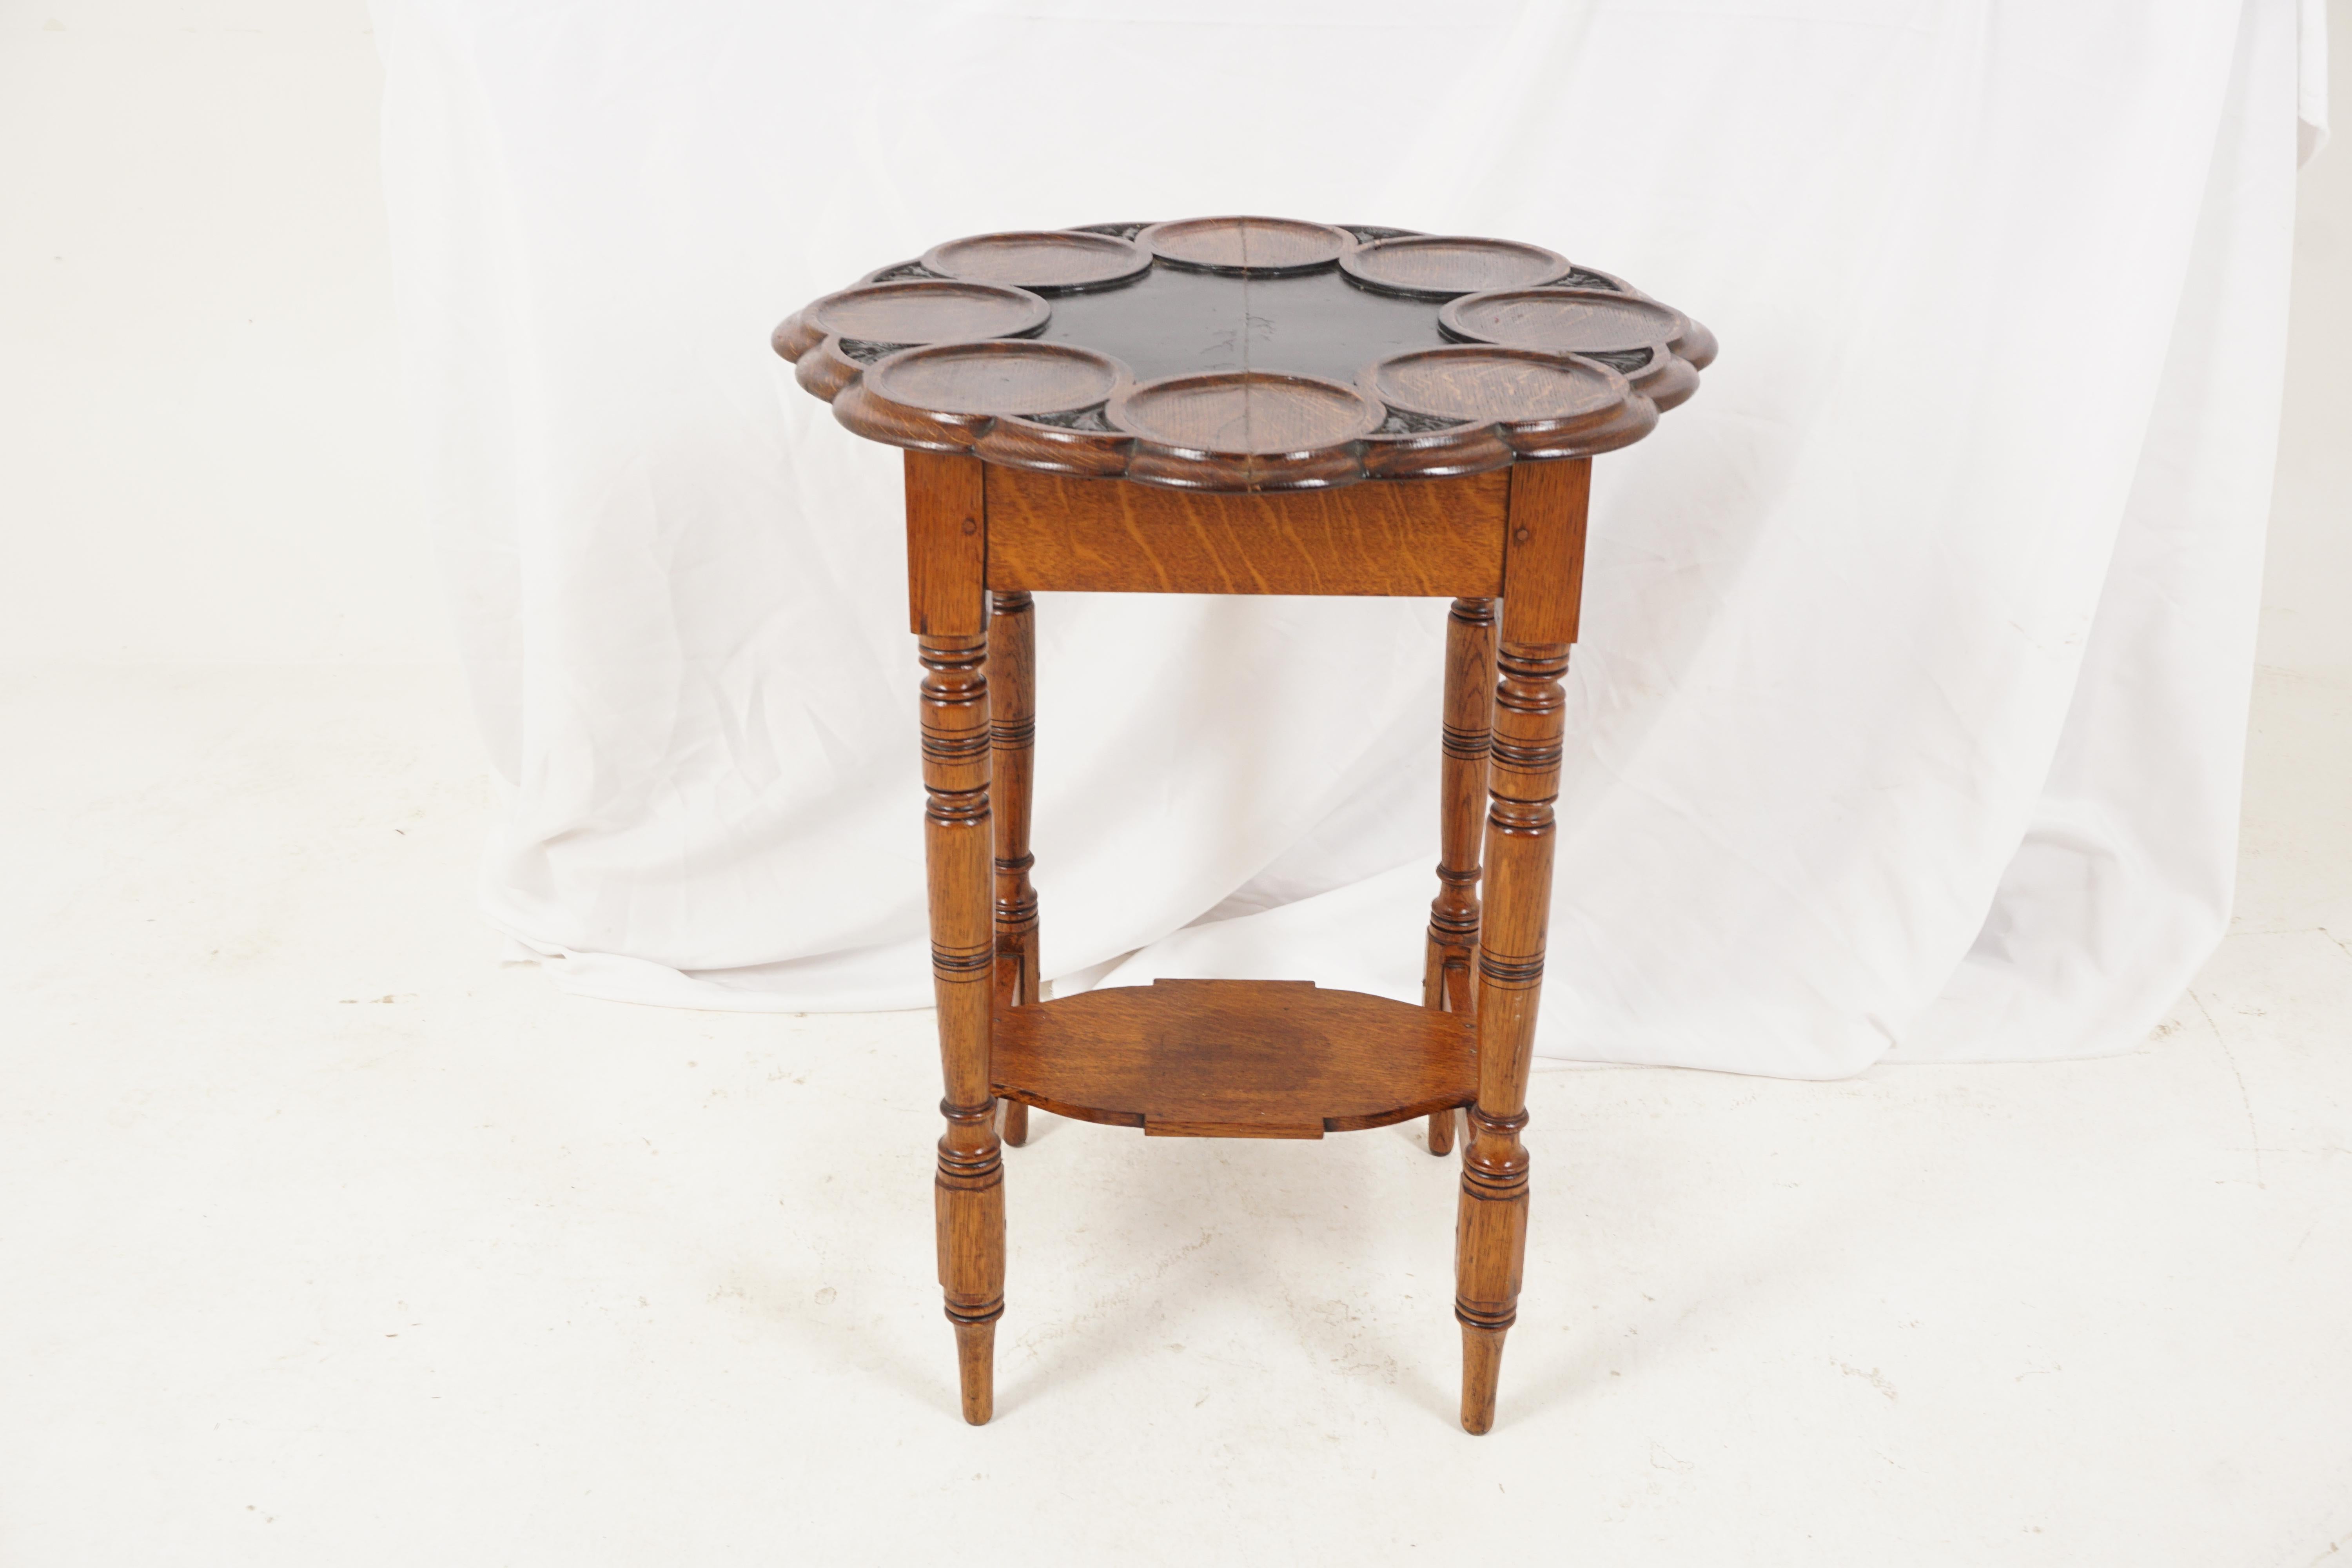 Antique Victorian Tiger Oak table, games table, Scotland 1900, H251

Scotland 1900
Solid Oak
Original finish
Circular top with moulded edge
Eight circular shelves adorn the top
All standing on 4 turned legs 
United by stretchers and with an